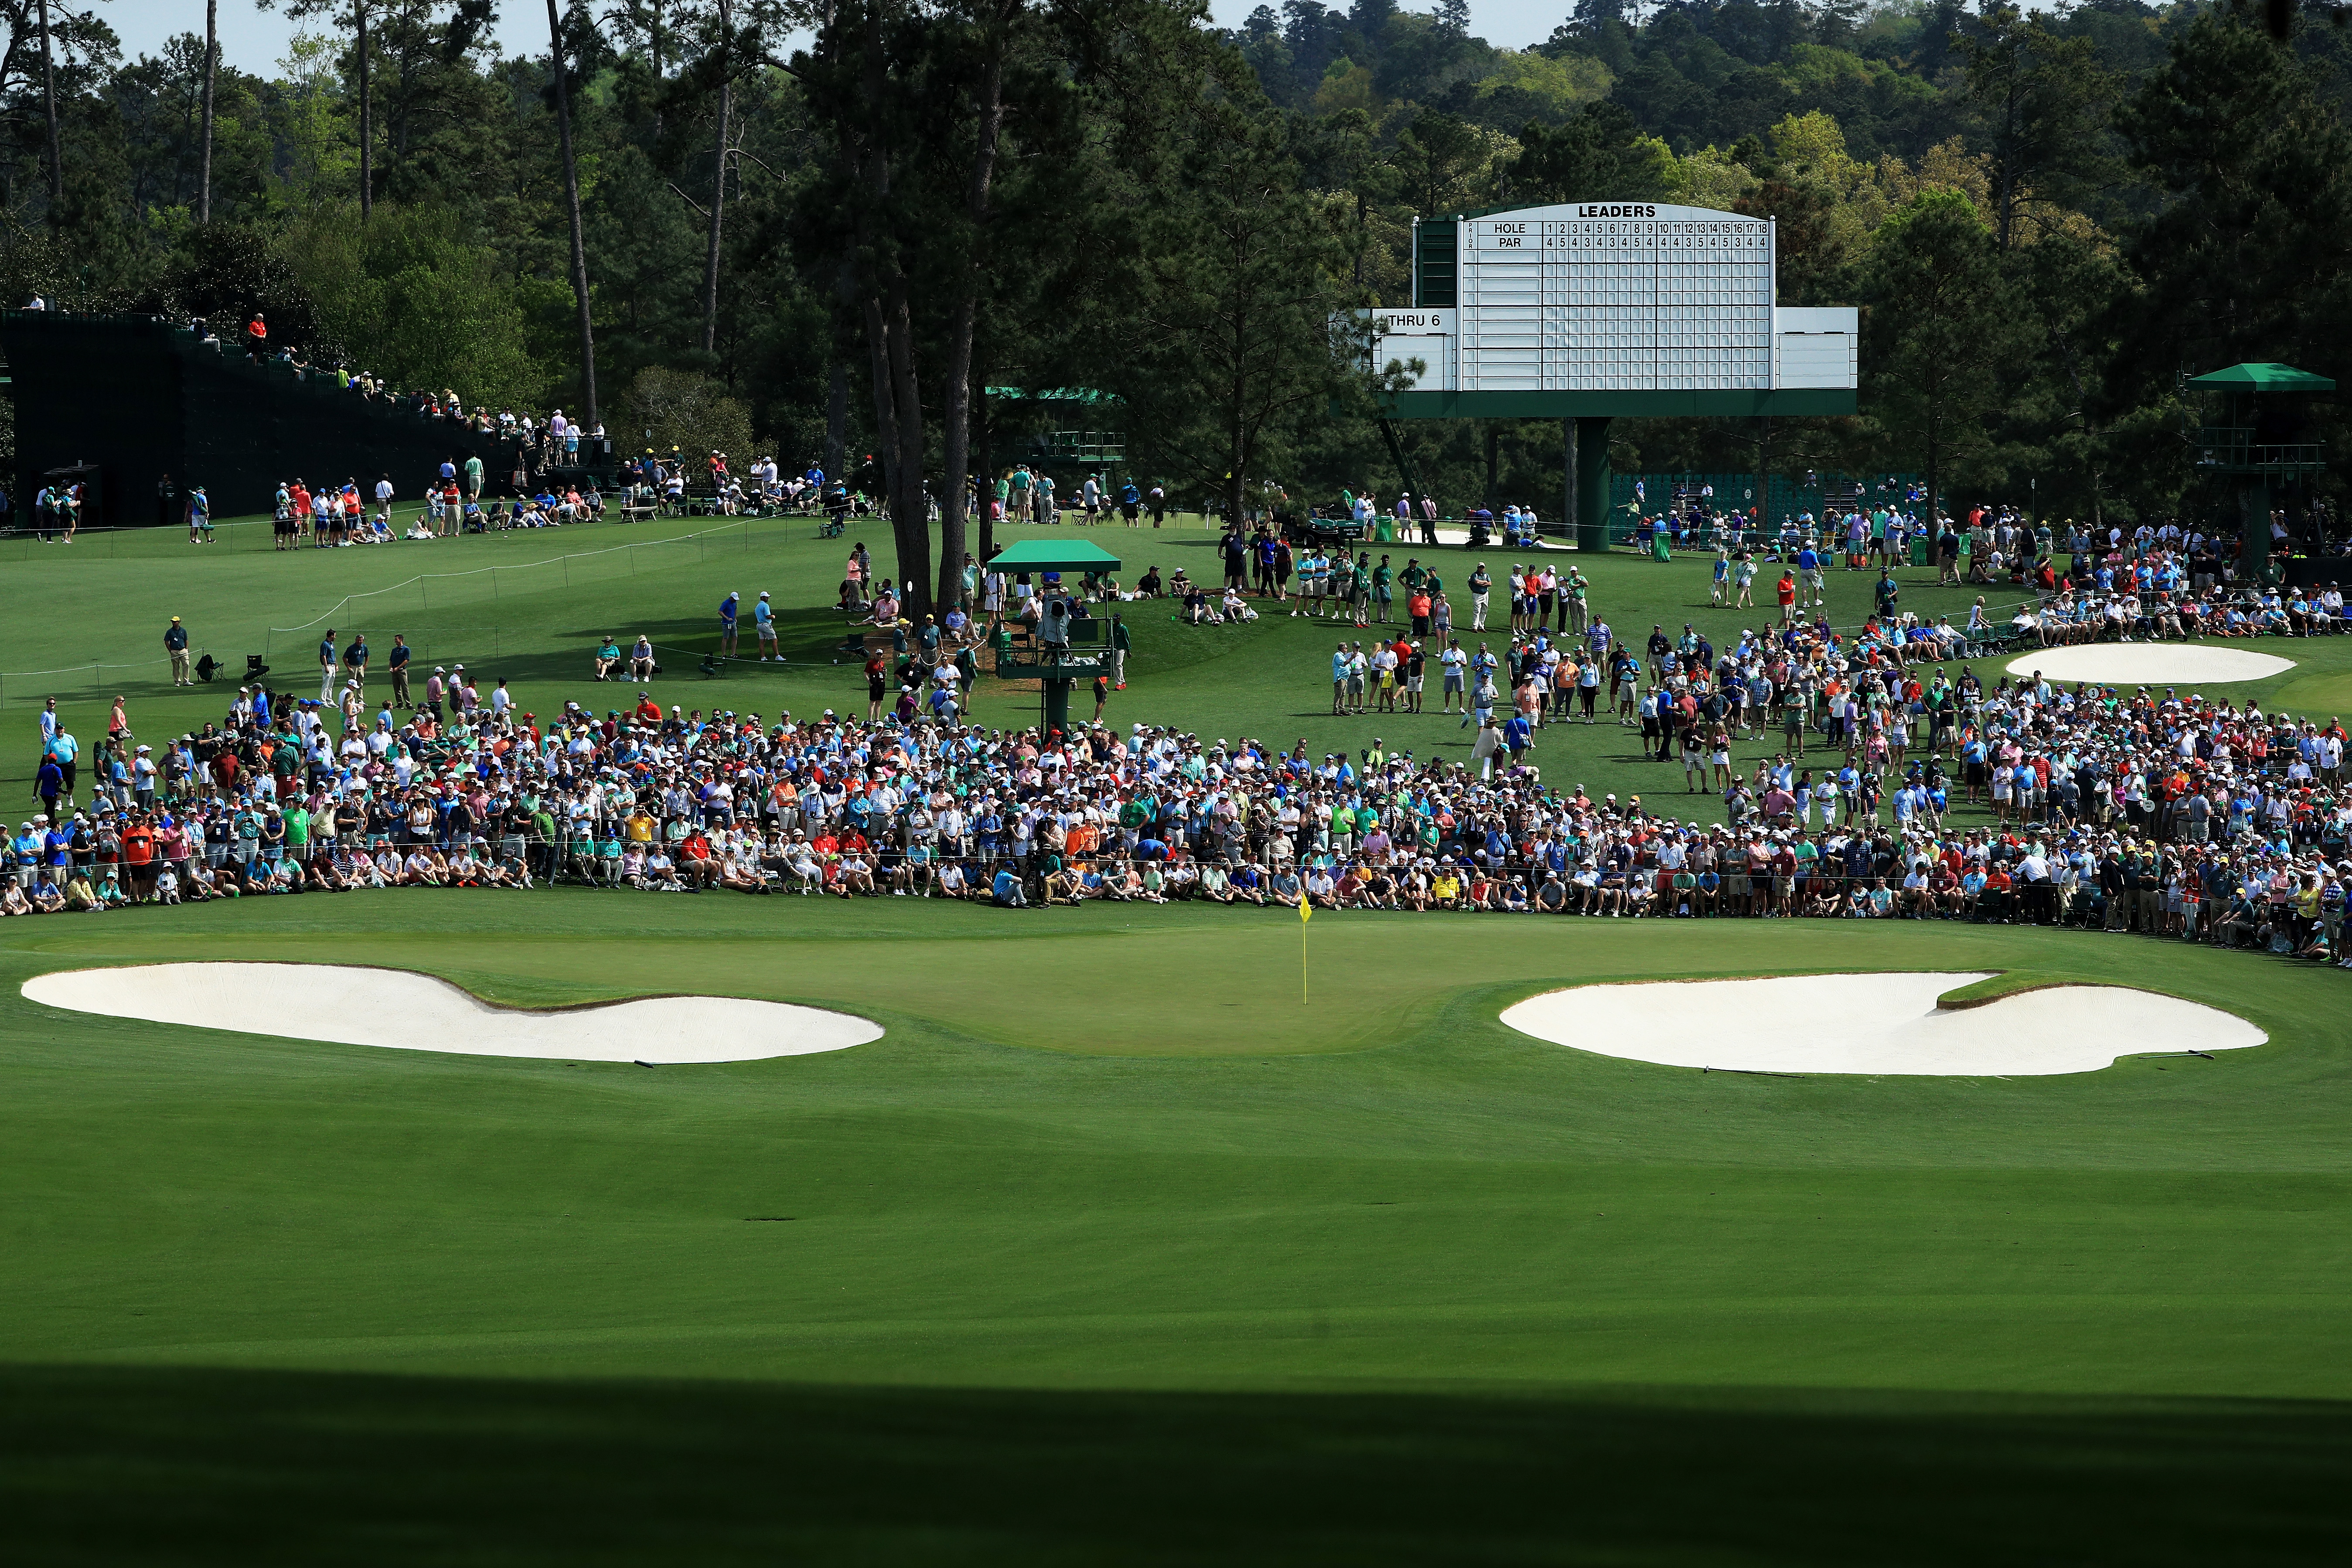 Masters final round pairings and tee times